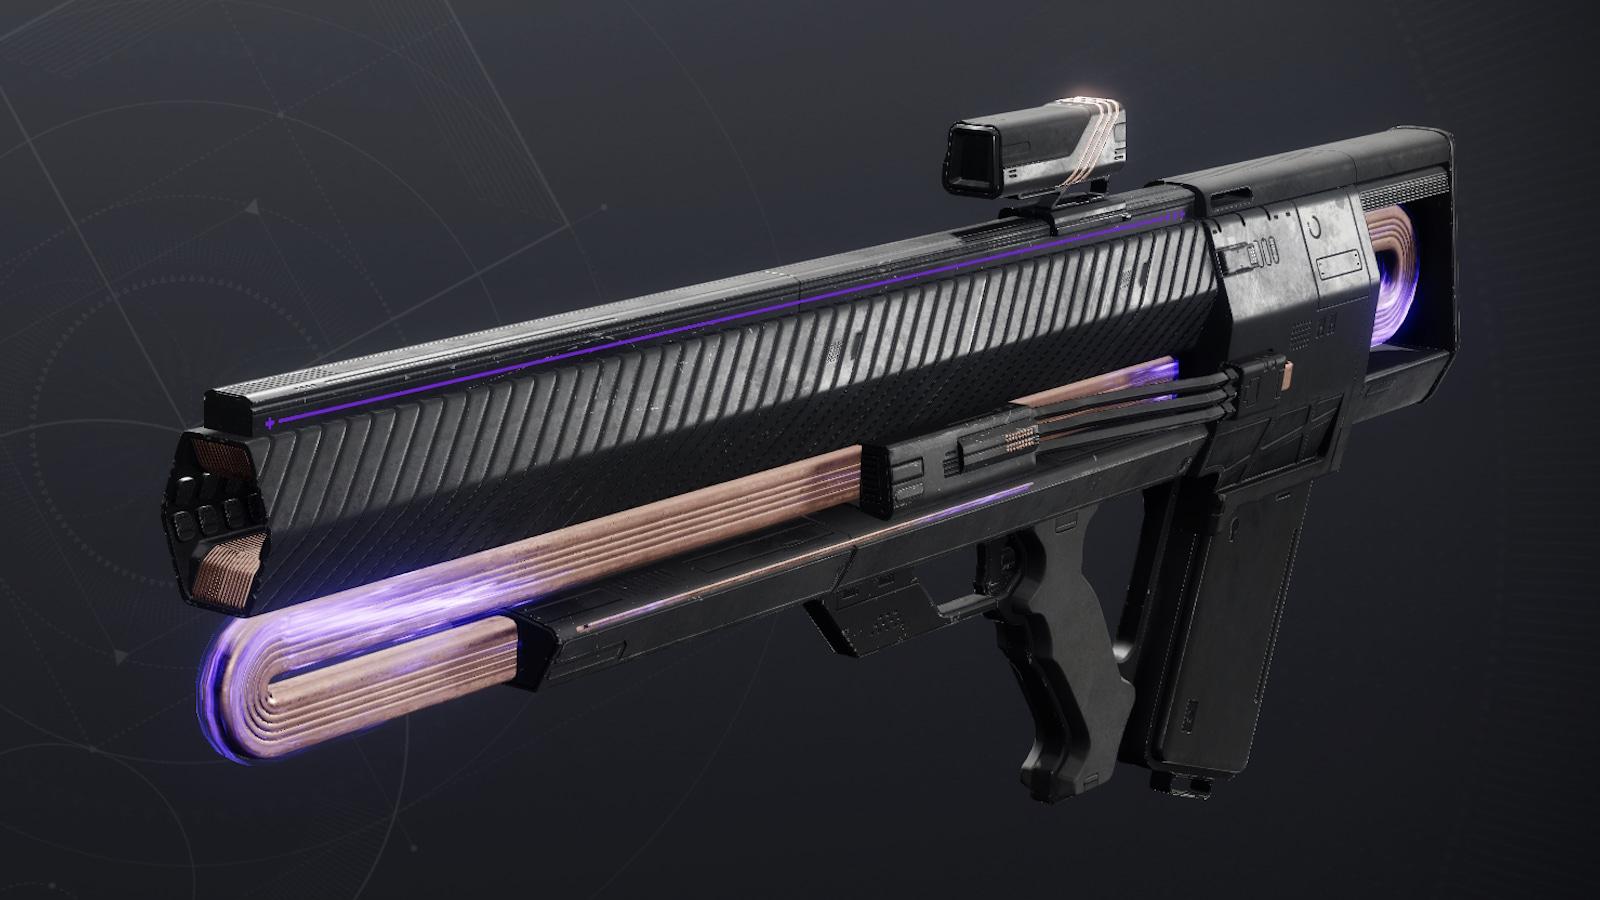 The Graviton Lance Exotic Pulse Rifle from Destiny 2 with UI hidden.